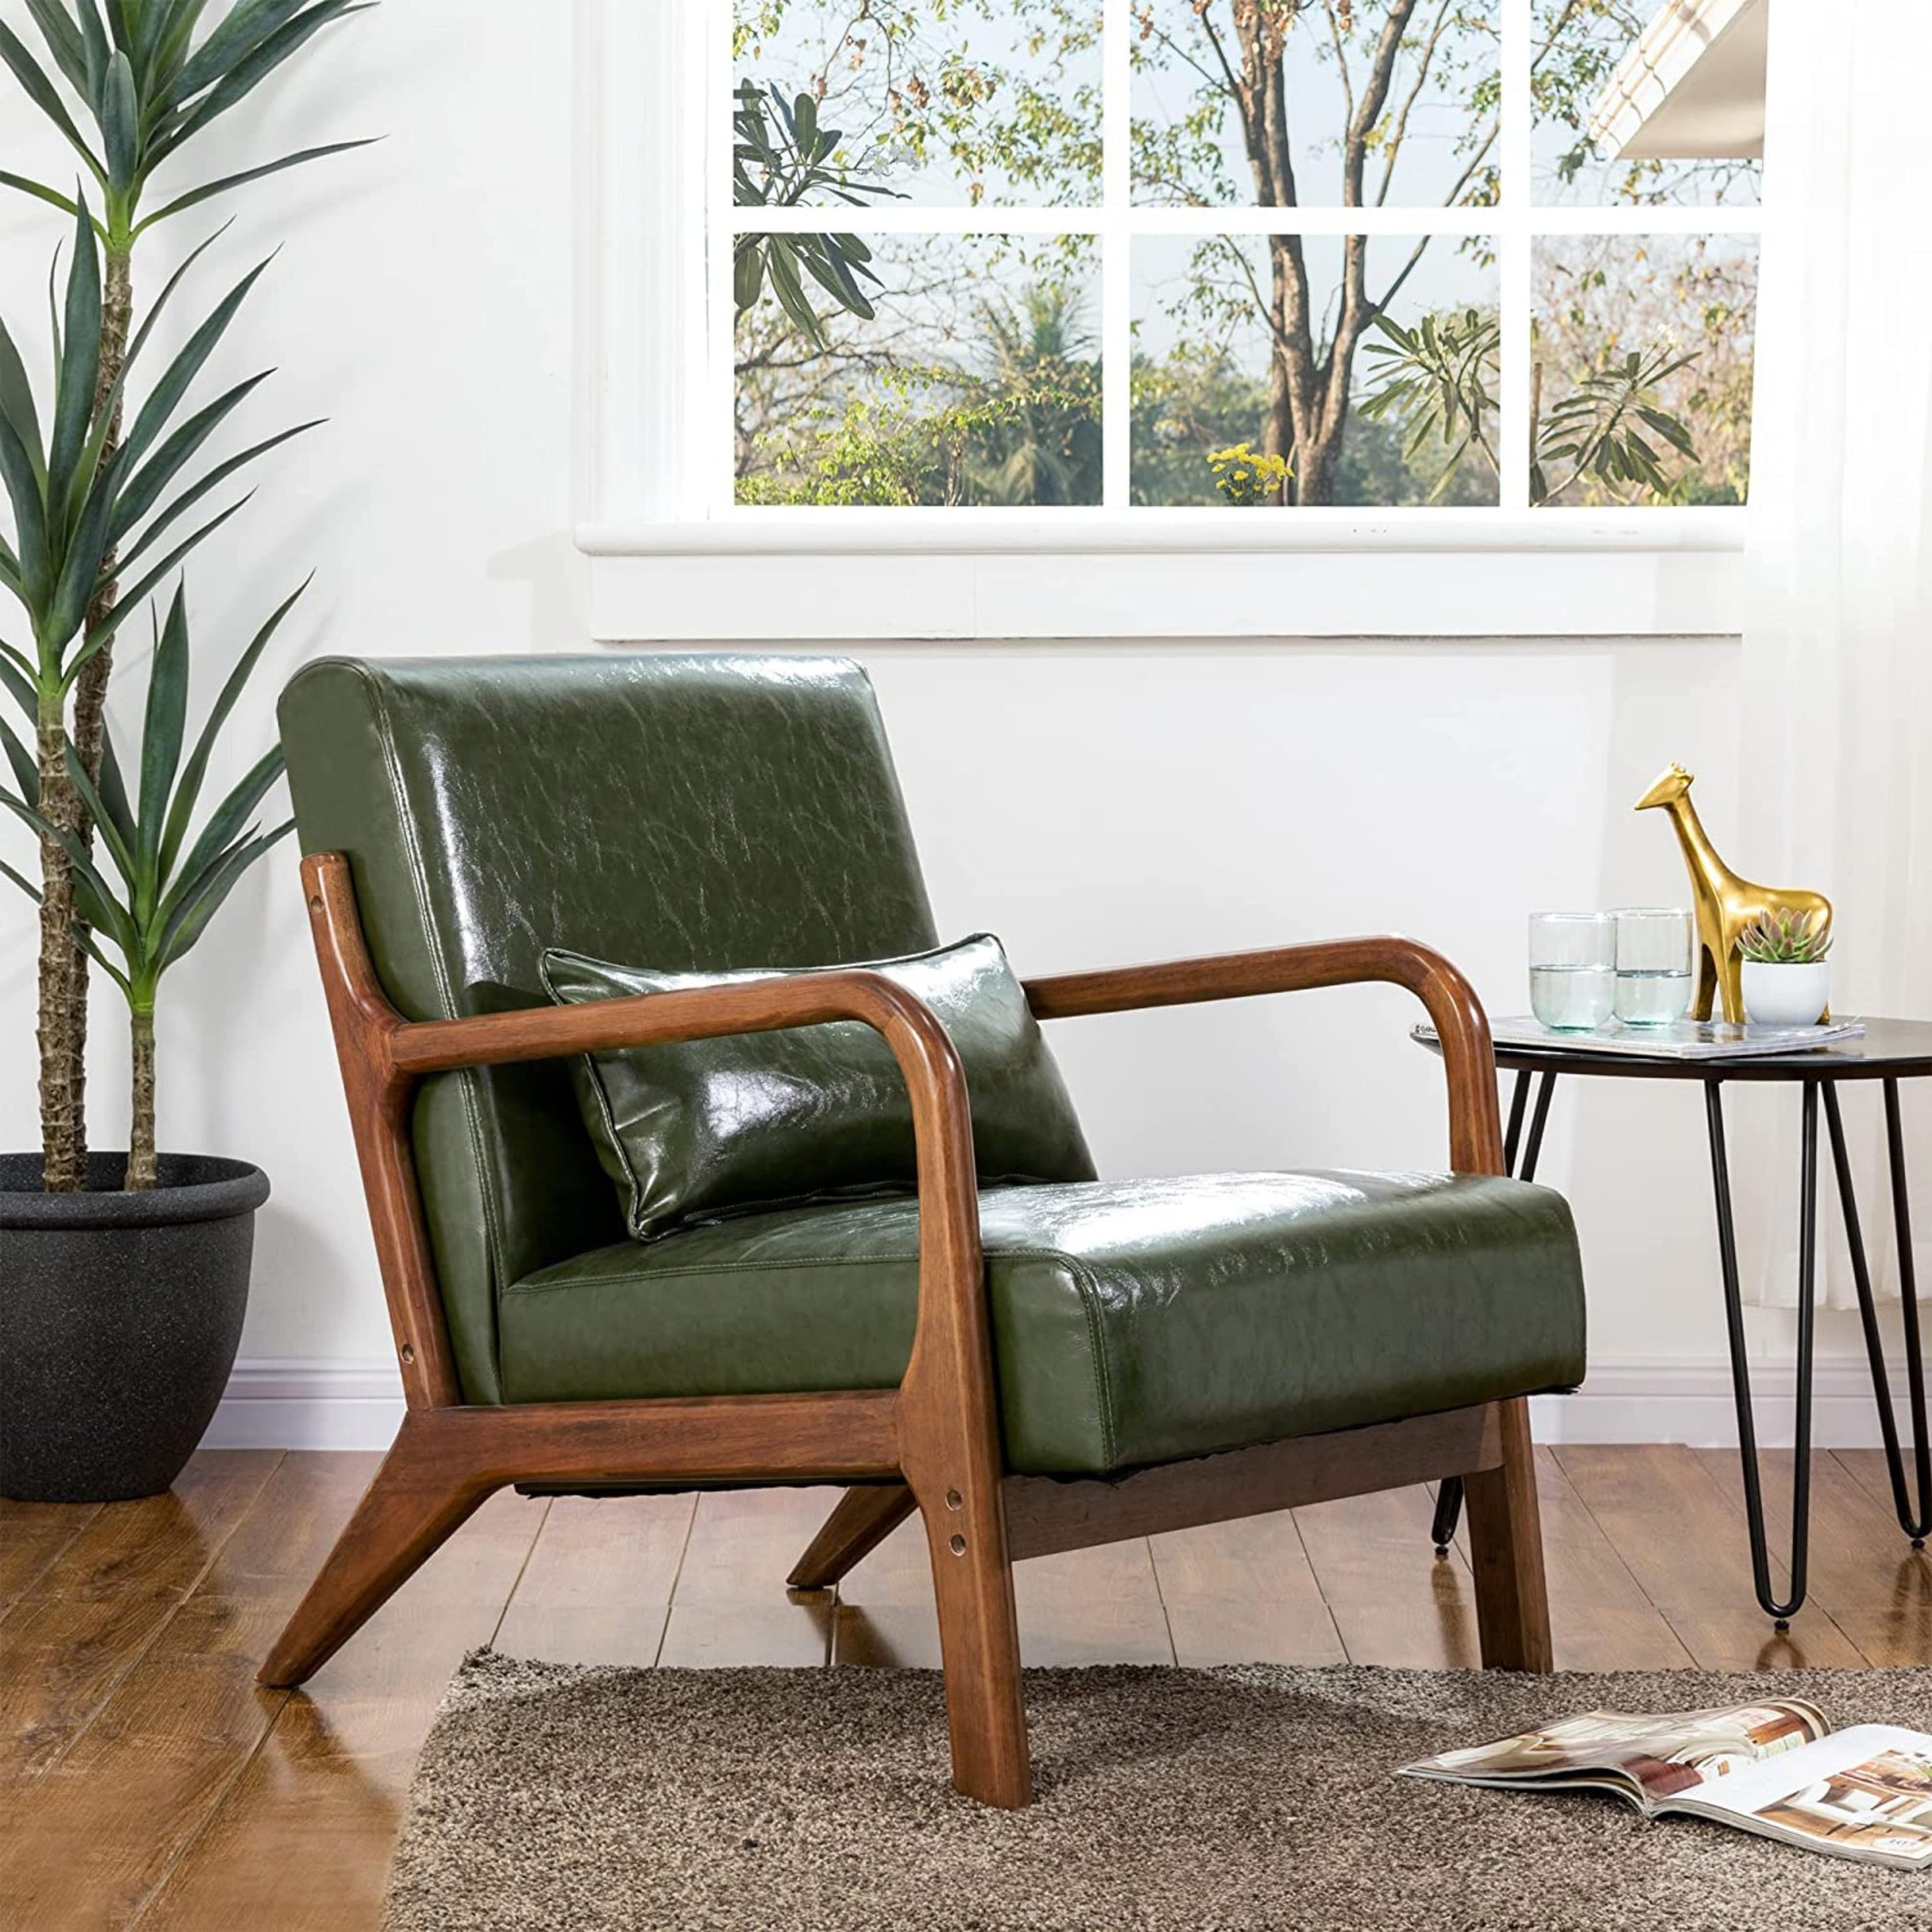 Hunter Green Faux Leather Cushion Chair with Rounded Wood Leg Frame-min.jpg